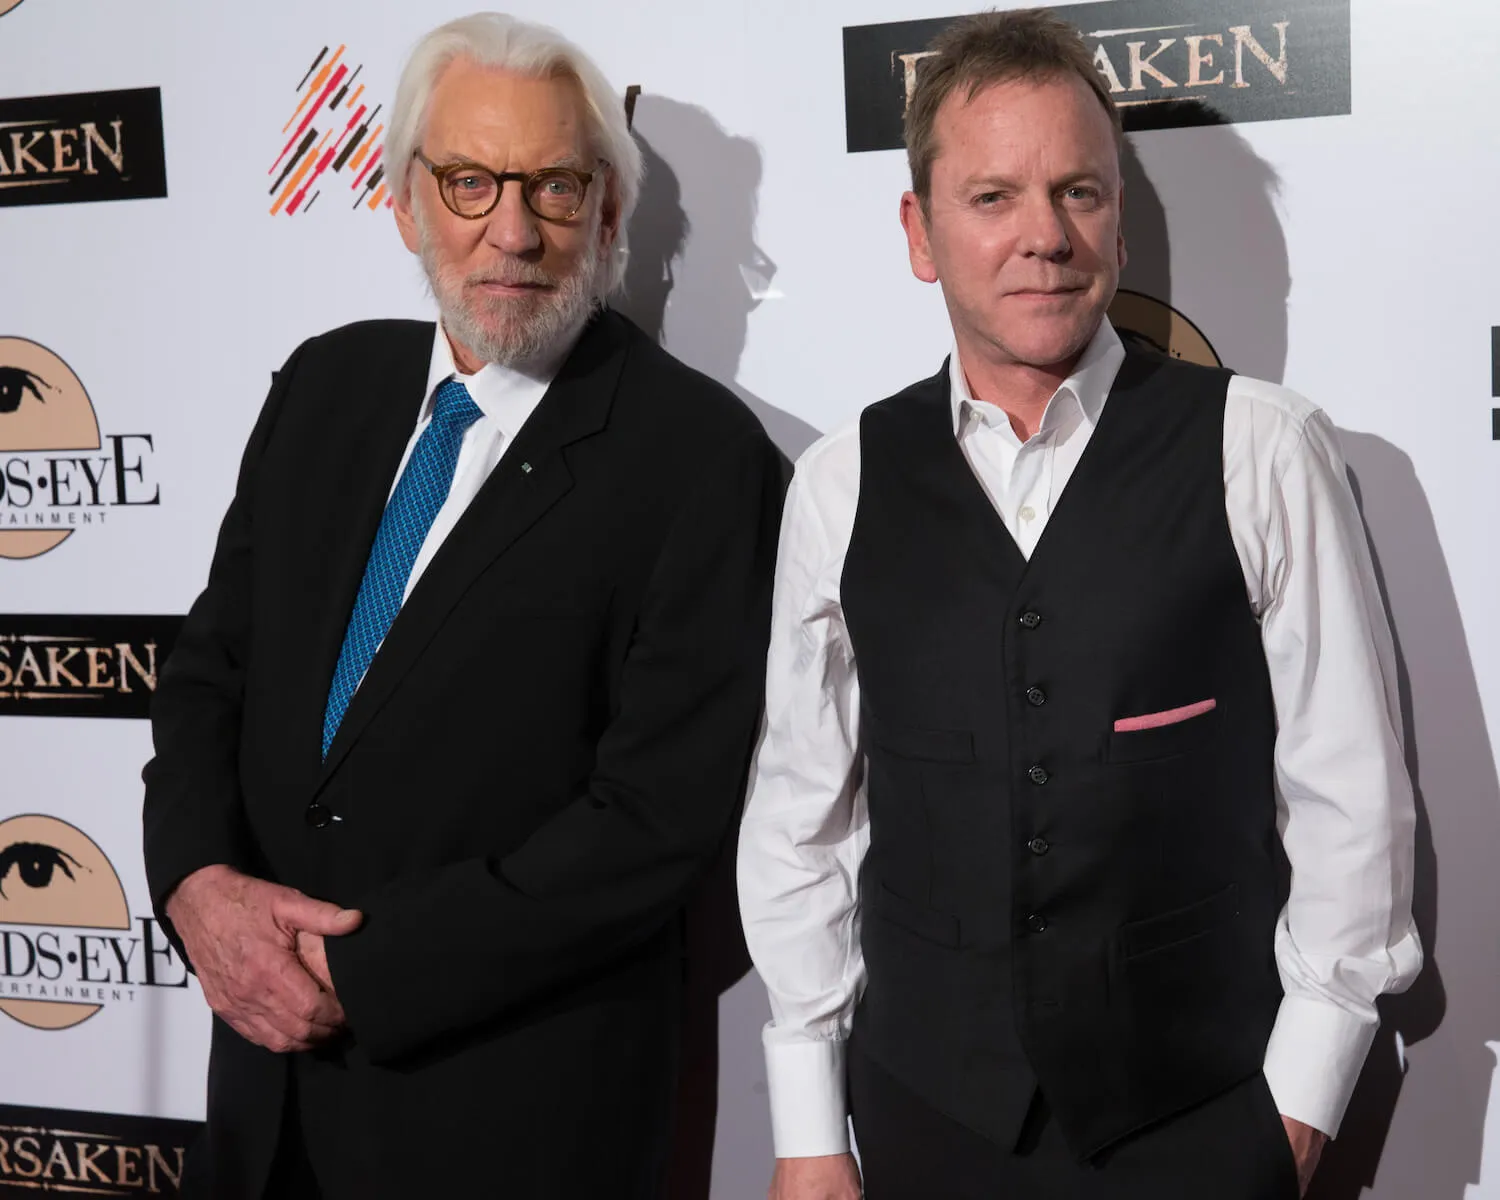 Donald Sutherland standing next to his son, Kiefer Sutherland, in 2016